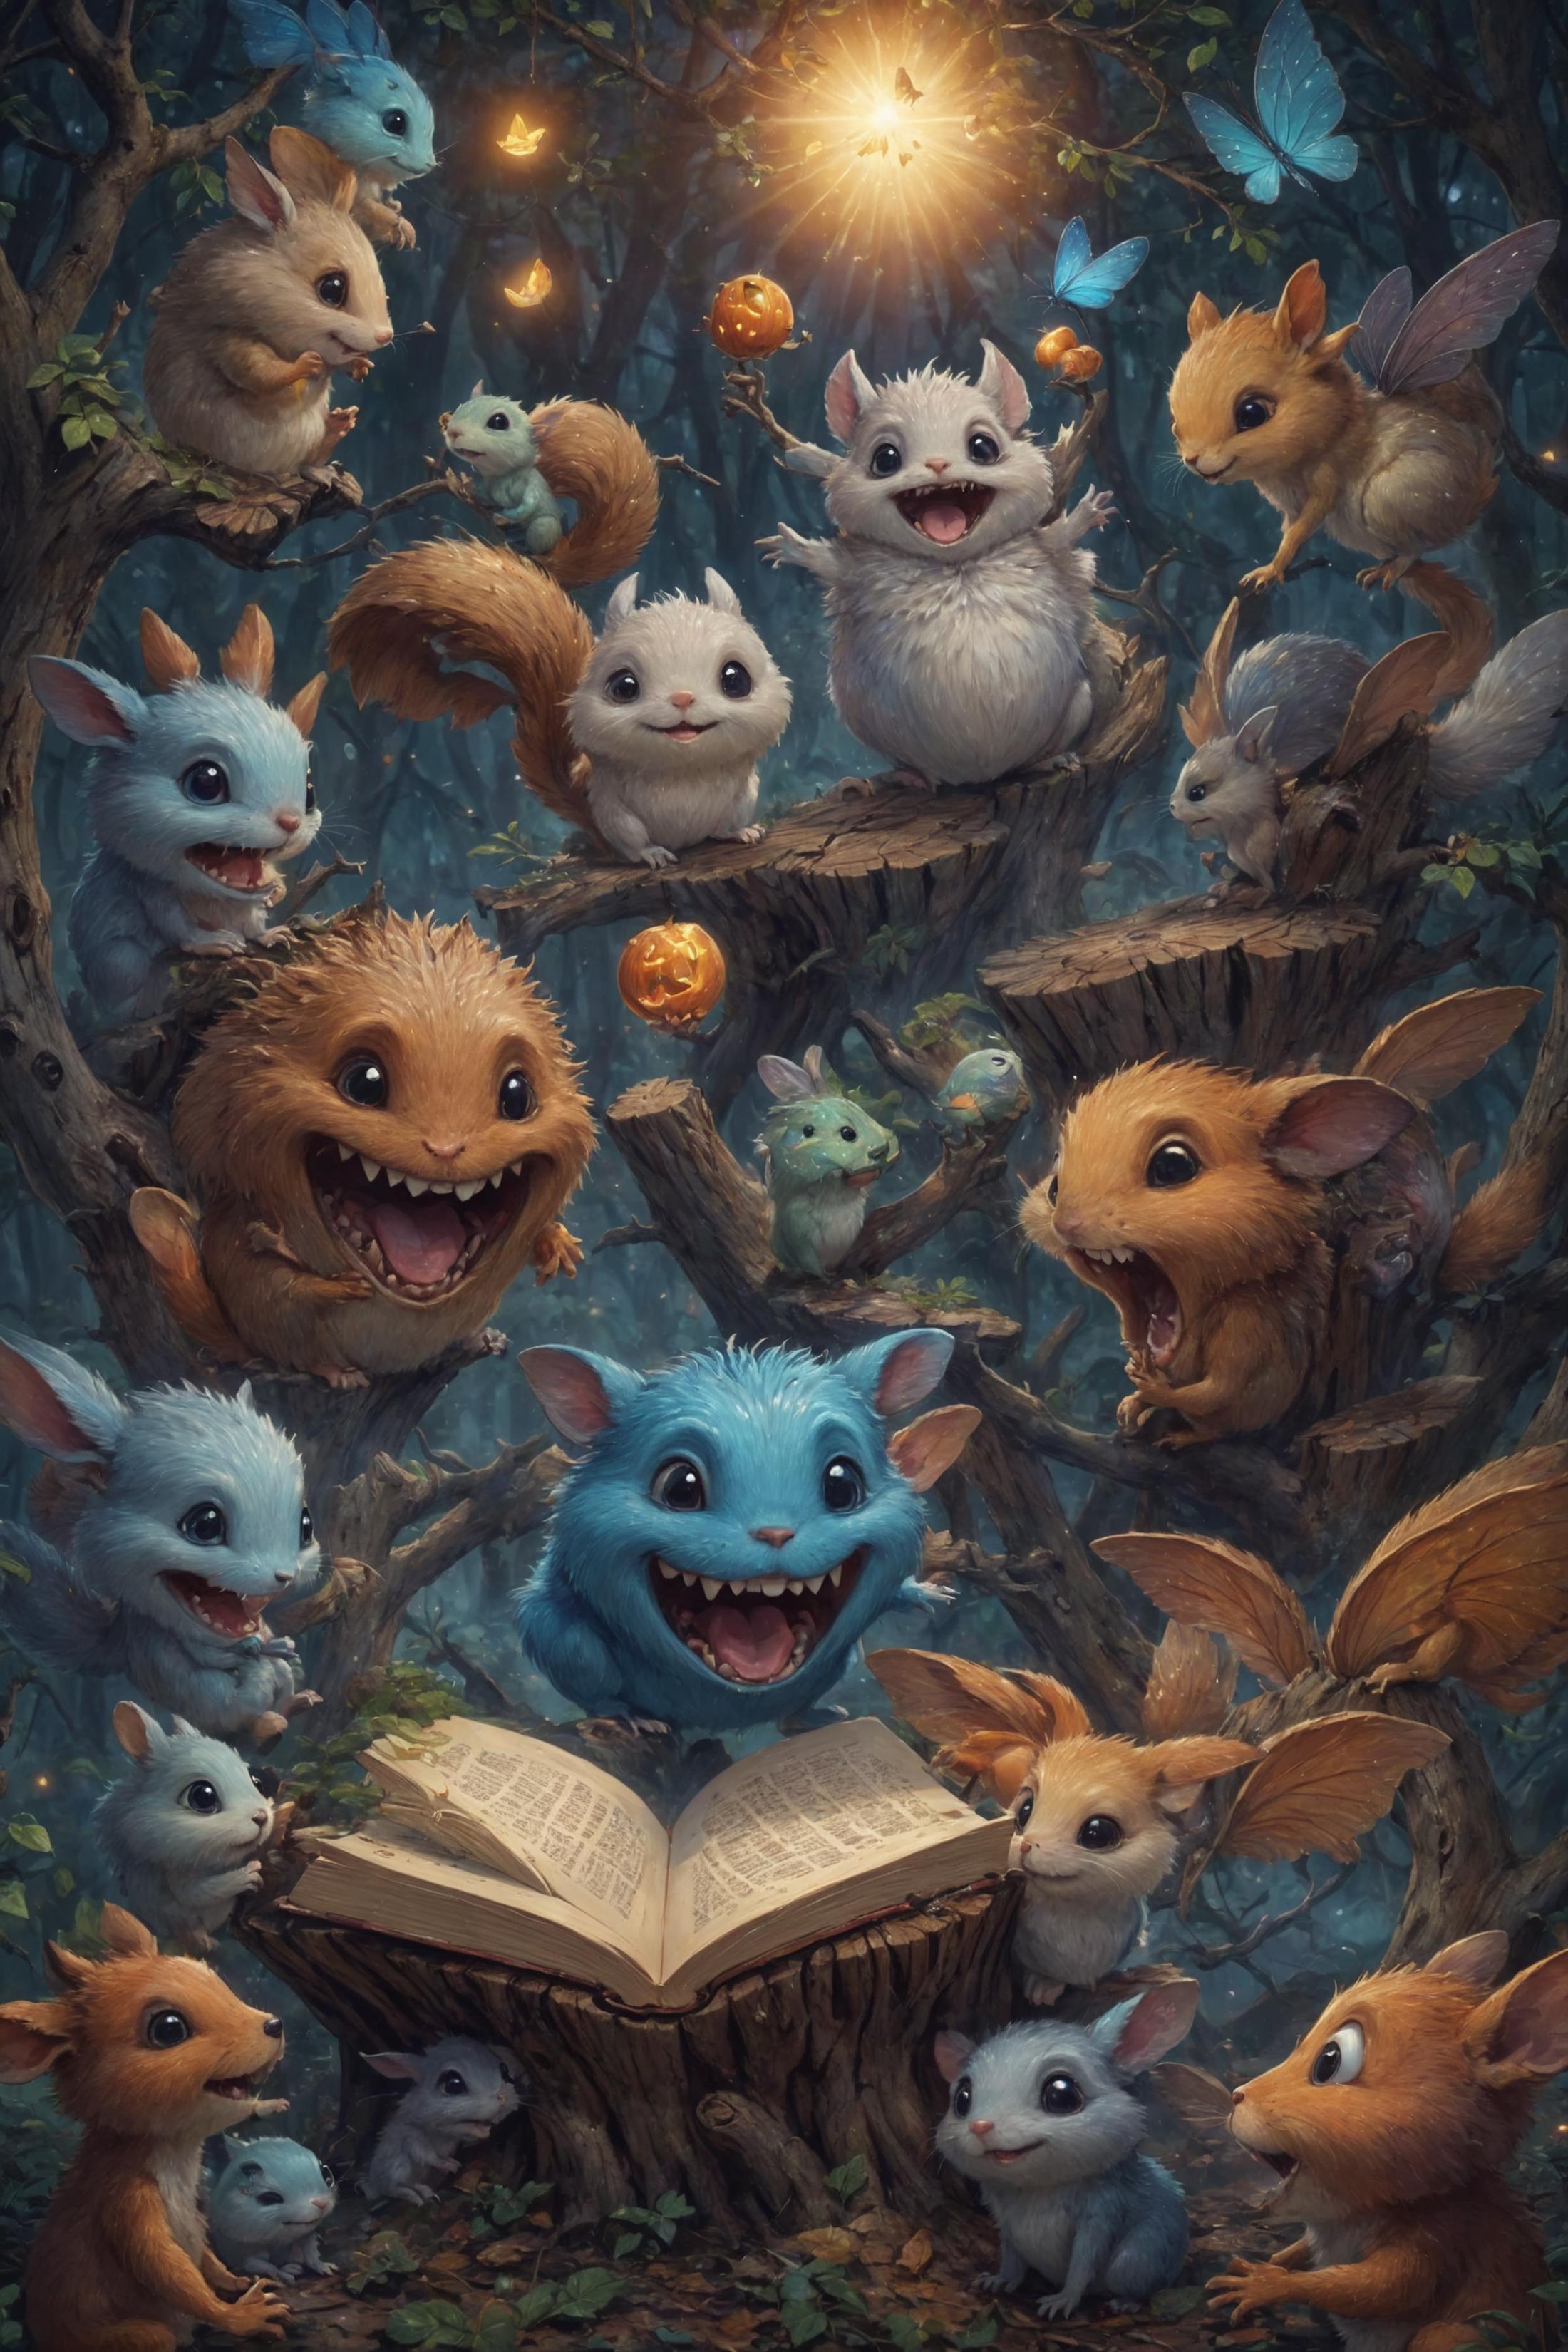 A painting of various animals, including several rabbits and squirrels, sitting on a book and surrounded by trees.